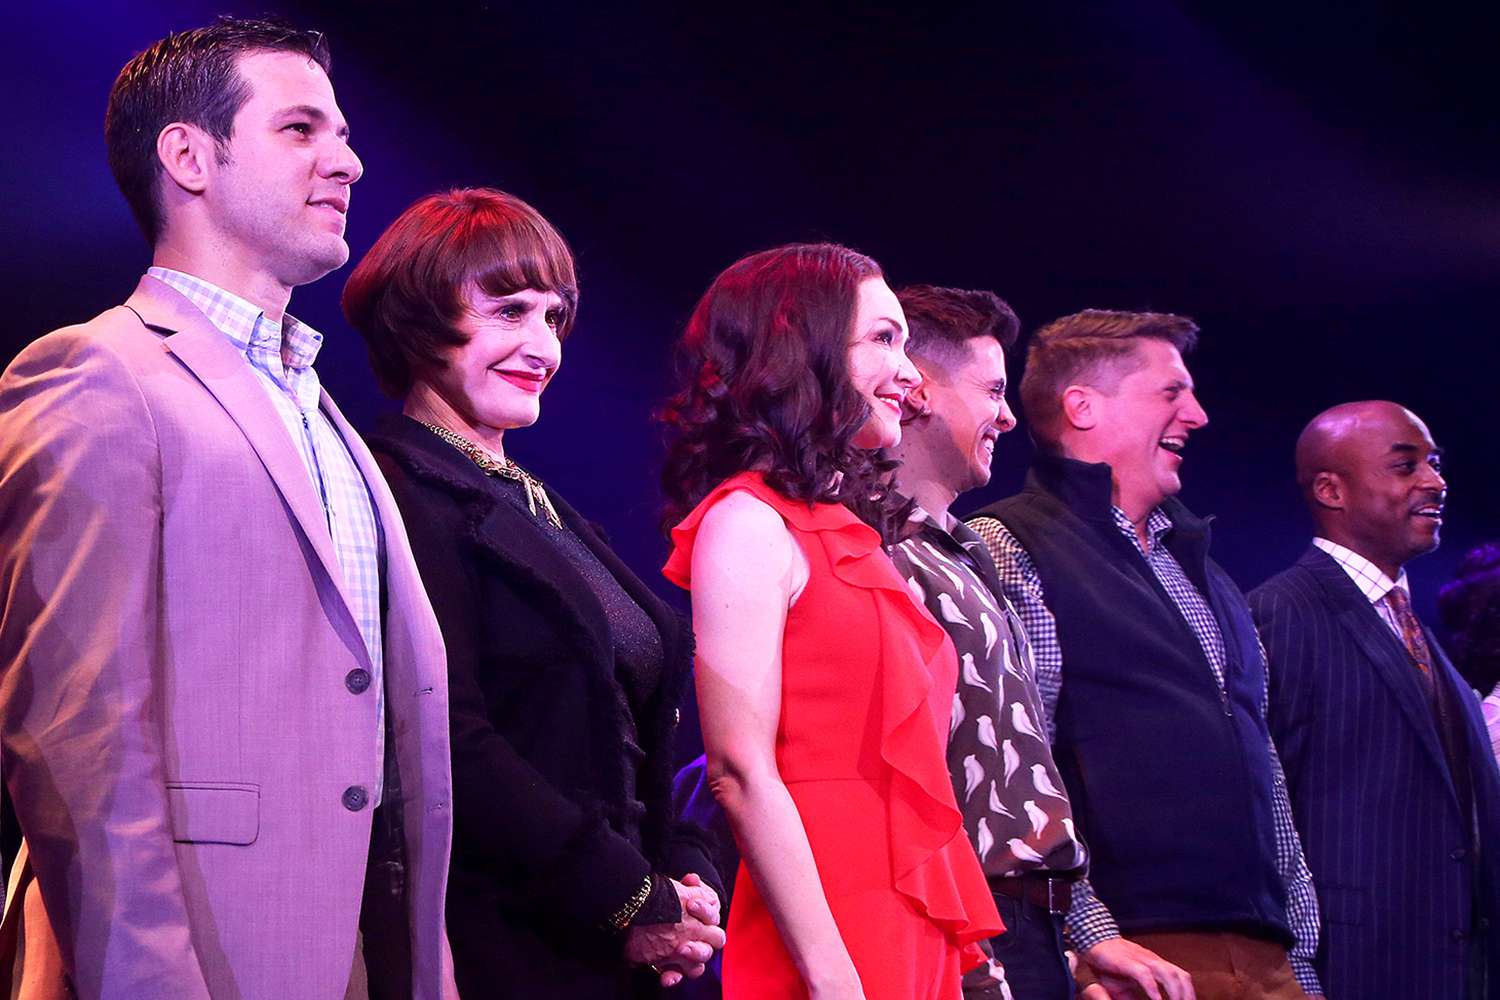 (L-R) Etai Benson, Patti LuPone, Katrina Lenk, Matt Doyle, Christopher Sieber and Terence Archie during the first preview re-opening performance of "Company" on Broadway at The Bernard Jacobs Theater on November 15, 2021 in New York City.